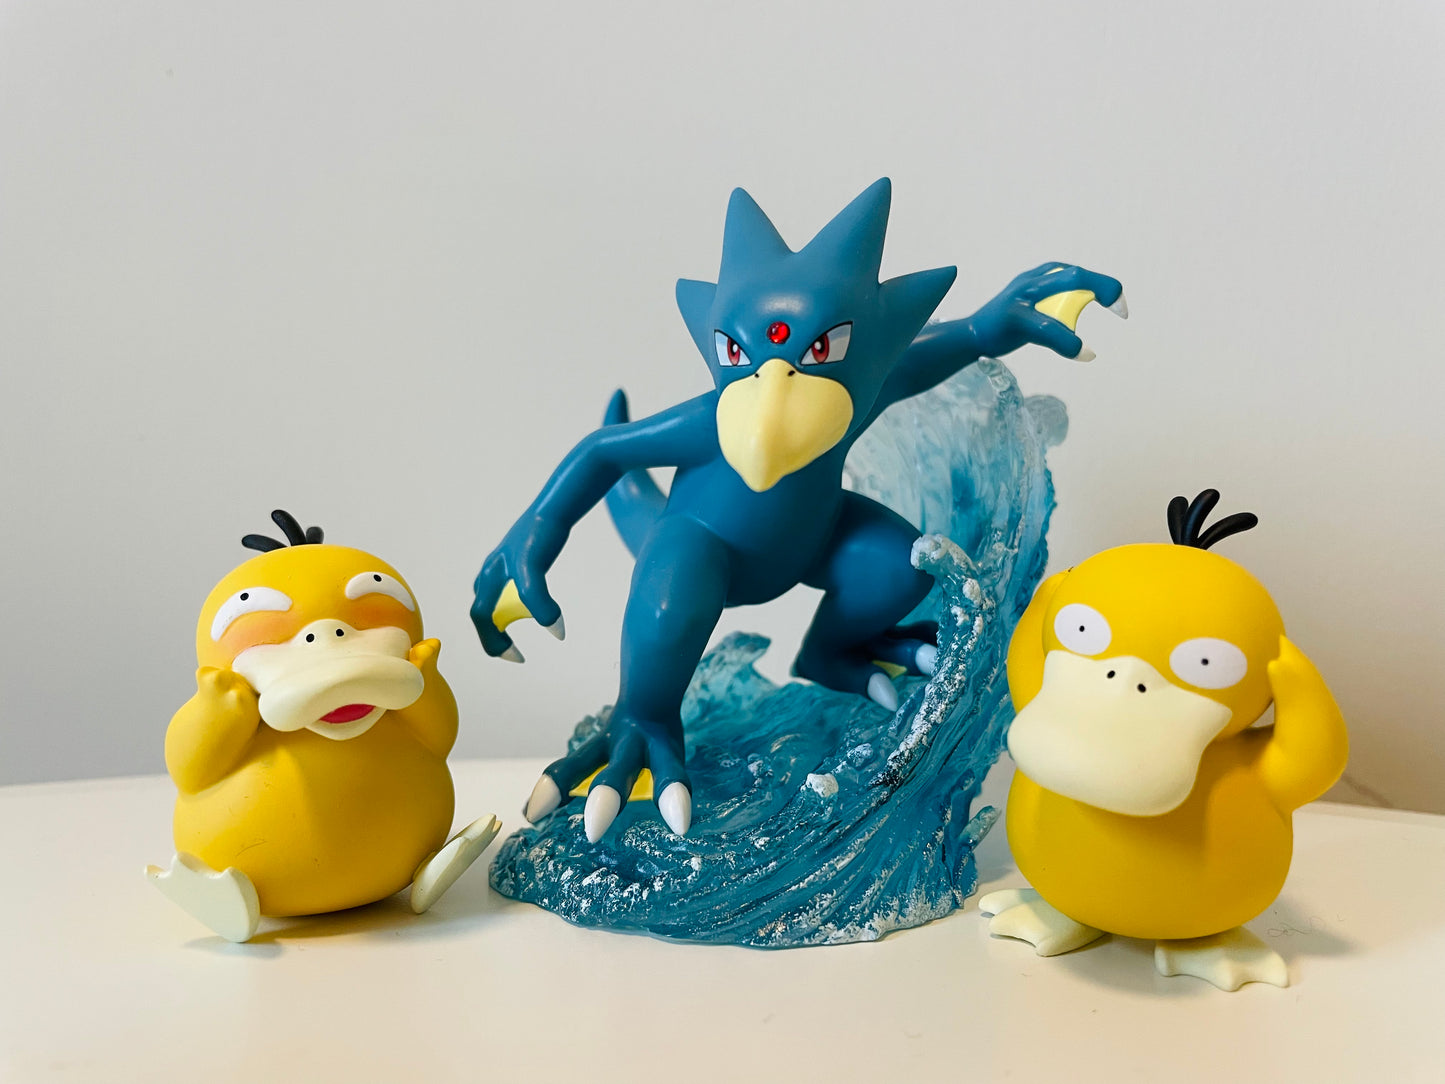 〖Sold Out〗Pokemon Scale World Psyduck Golduck #054 #055 1:20 - Pallet Town Studio